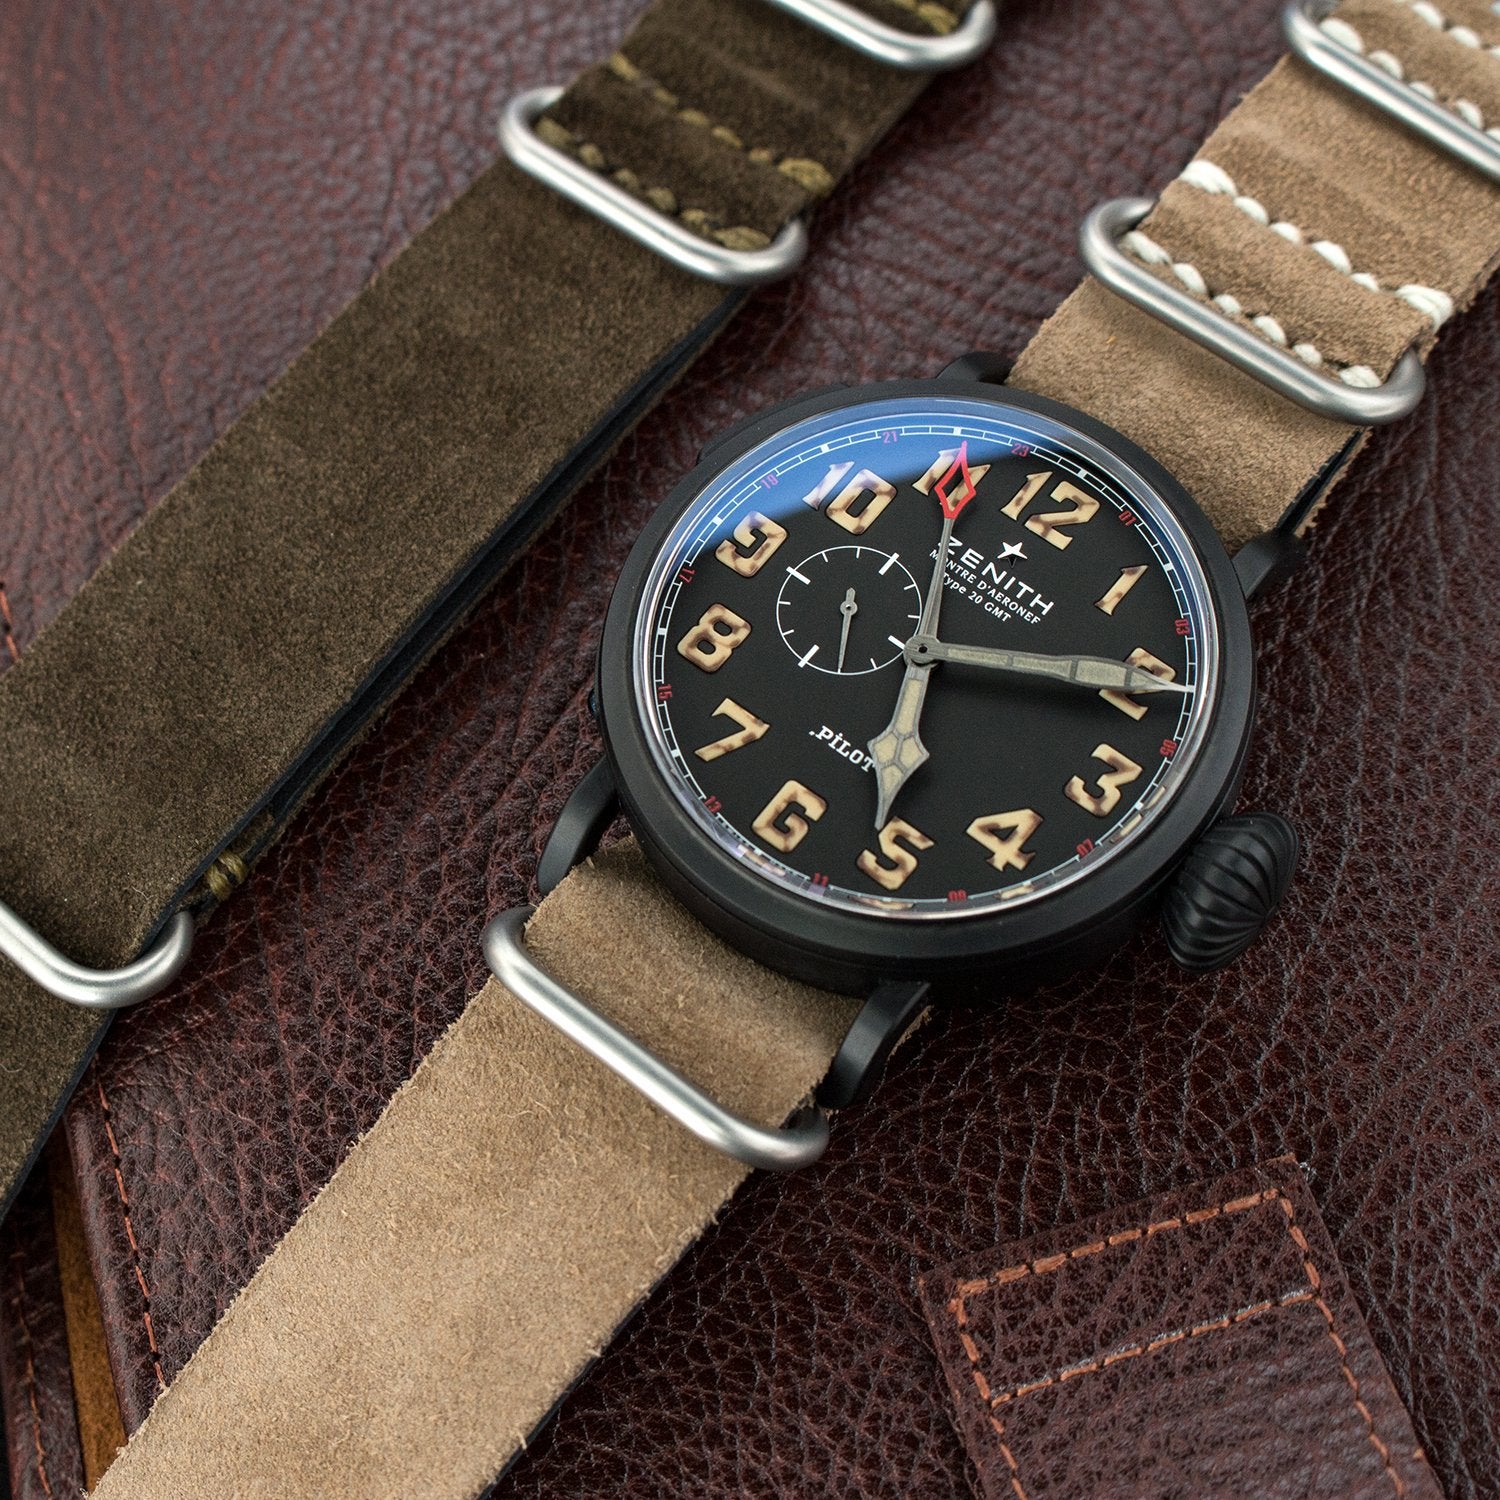 24mm Leather Nato Strap Zenith Pilot Montre D'Aeronef Type 20 GMT Watch Strapcode Watch Bands